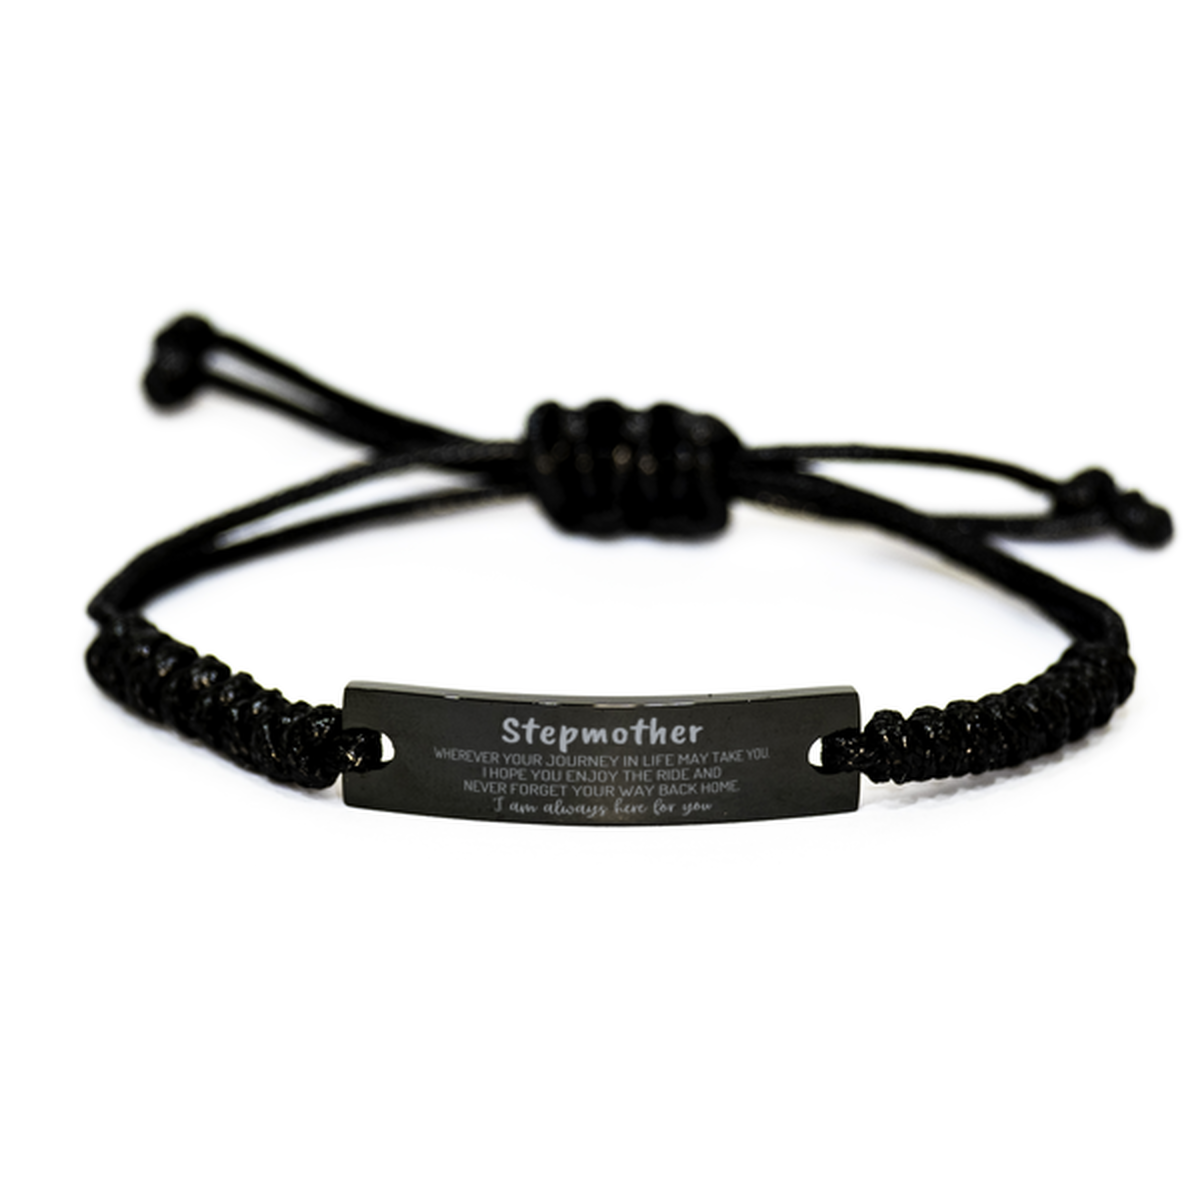 Stepmother wherever your journey in life may take you, I am always here for you Stepmother Black Rope Bracelet, Awesome Christmas Gifts For Stepmother, Stepmother Birthday Gifts for Men Women Family Loved One